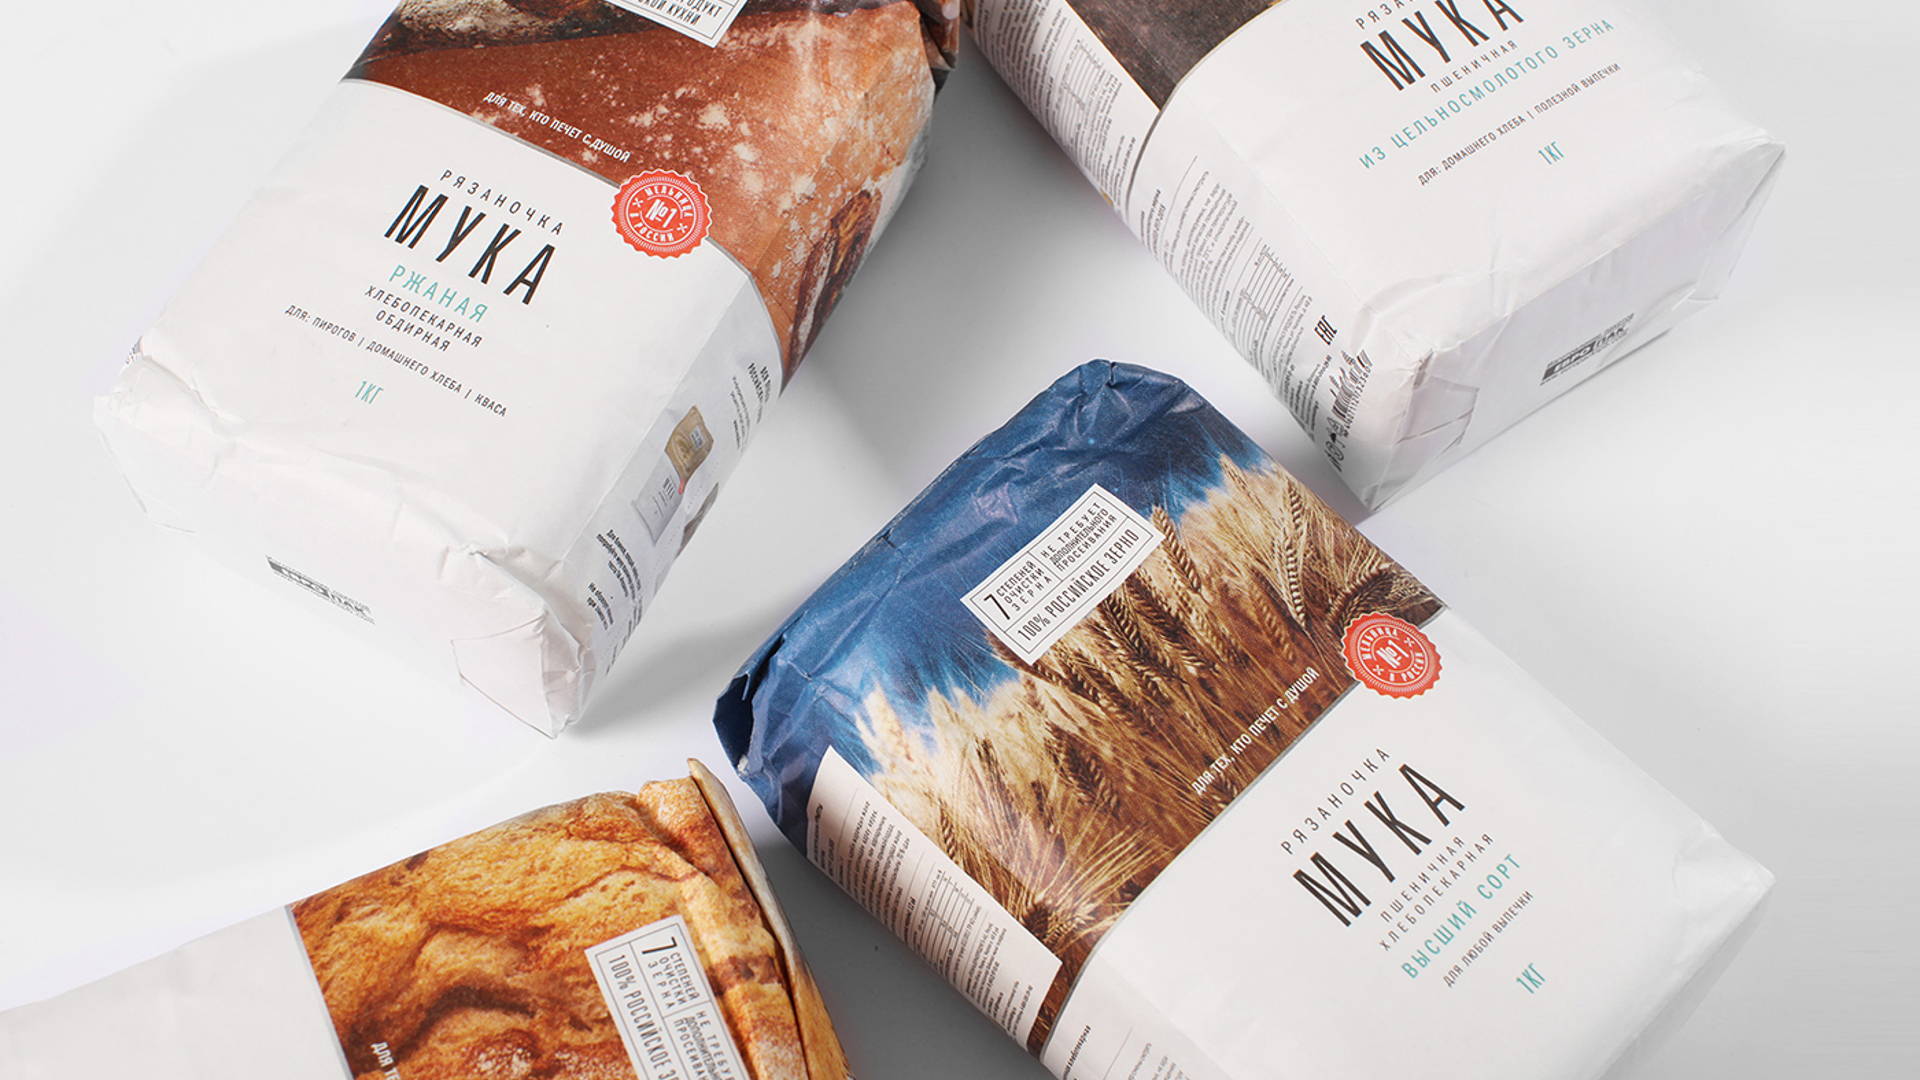 Featured image for This Russian Flour Brand Gets a Striking New Look